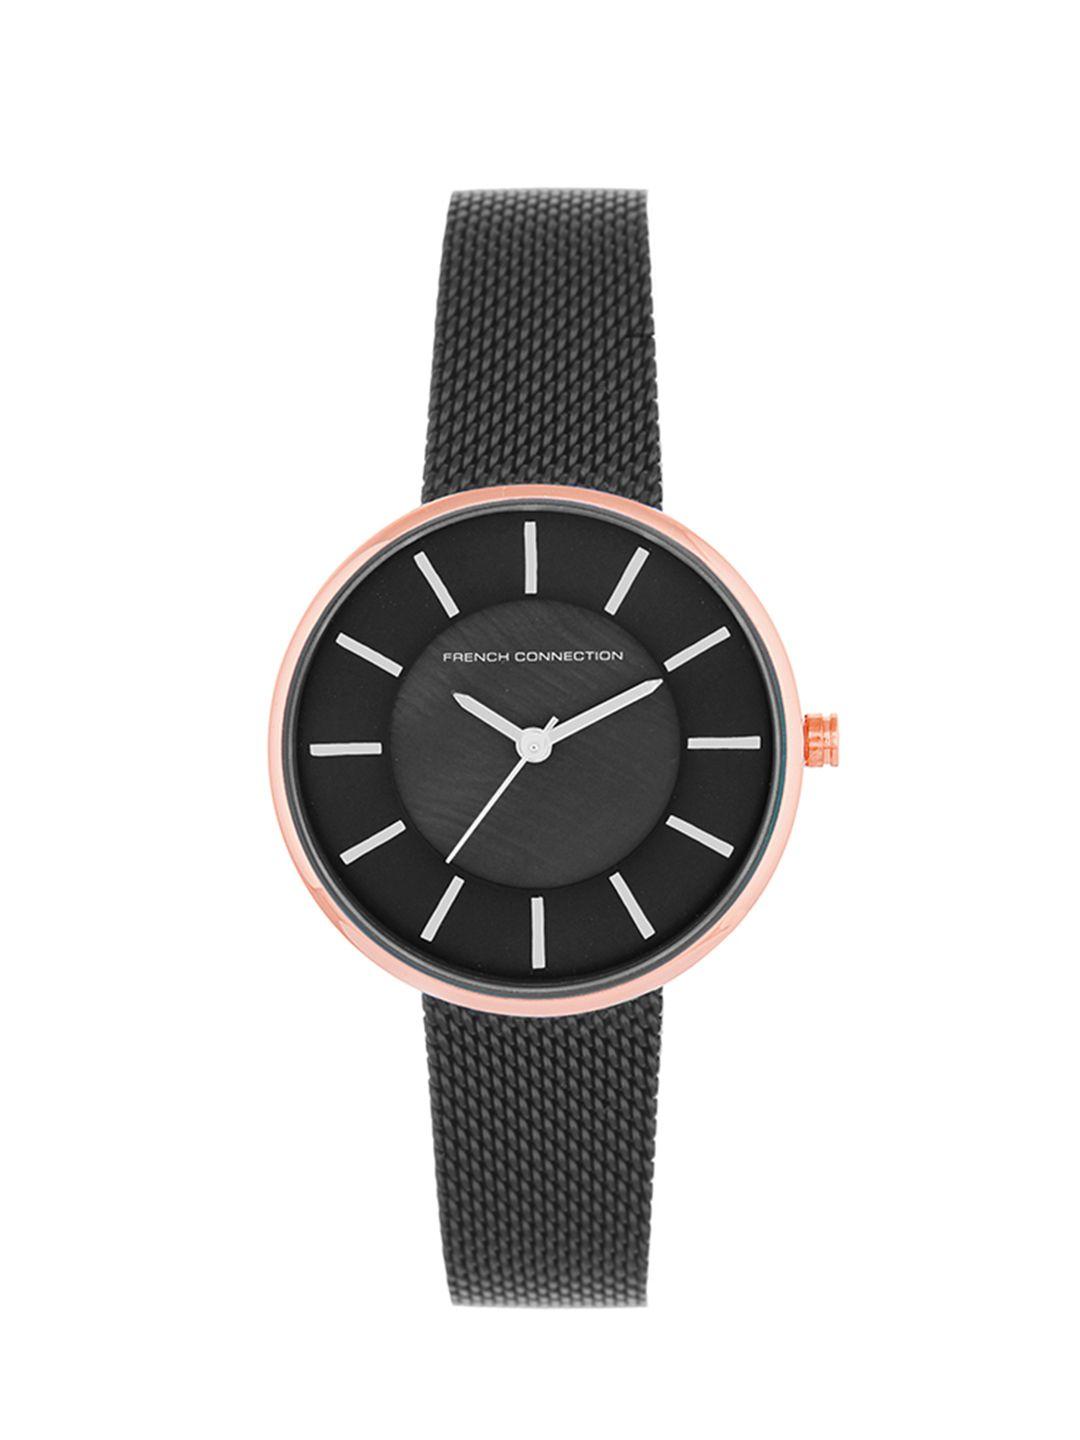 French Connection Women Black Dial & Stainless Steel Analogue Watch - FCN0005F